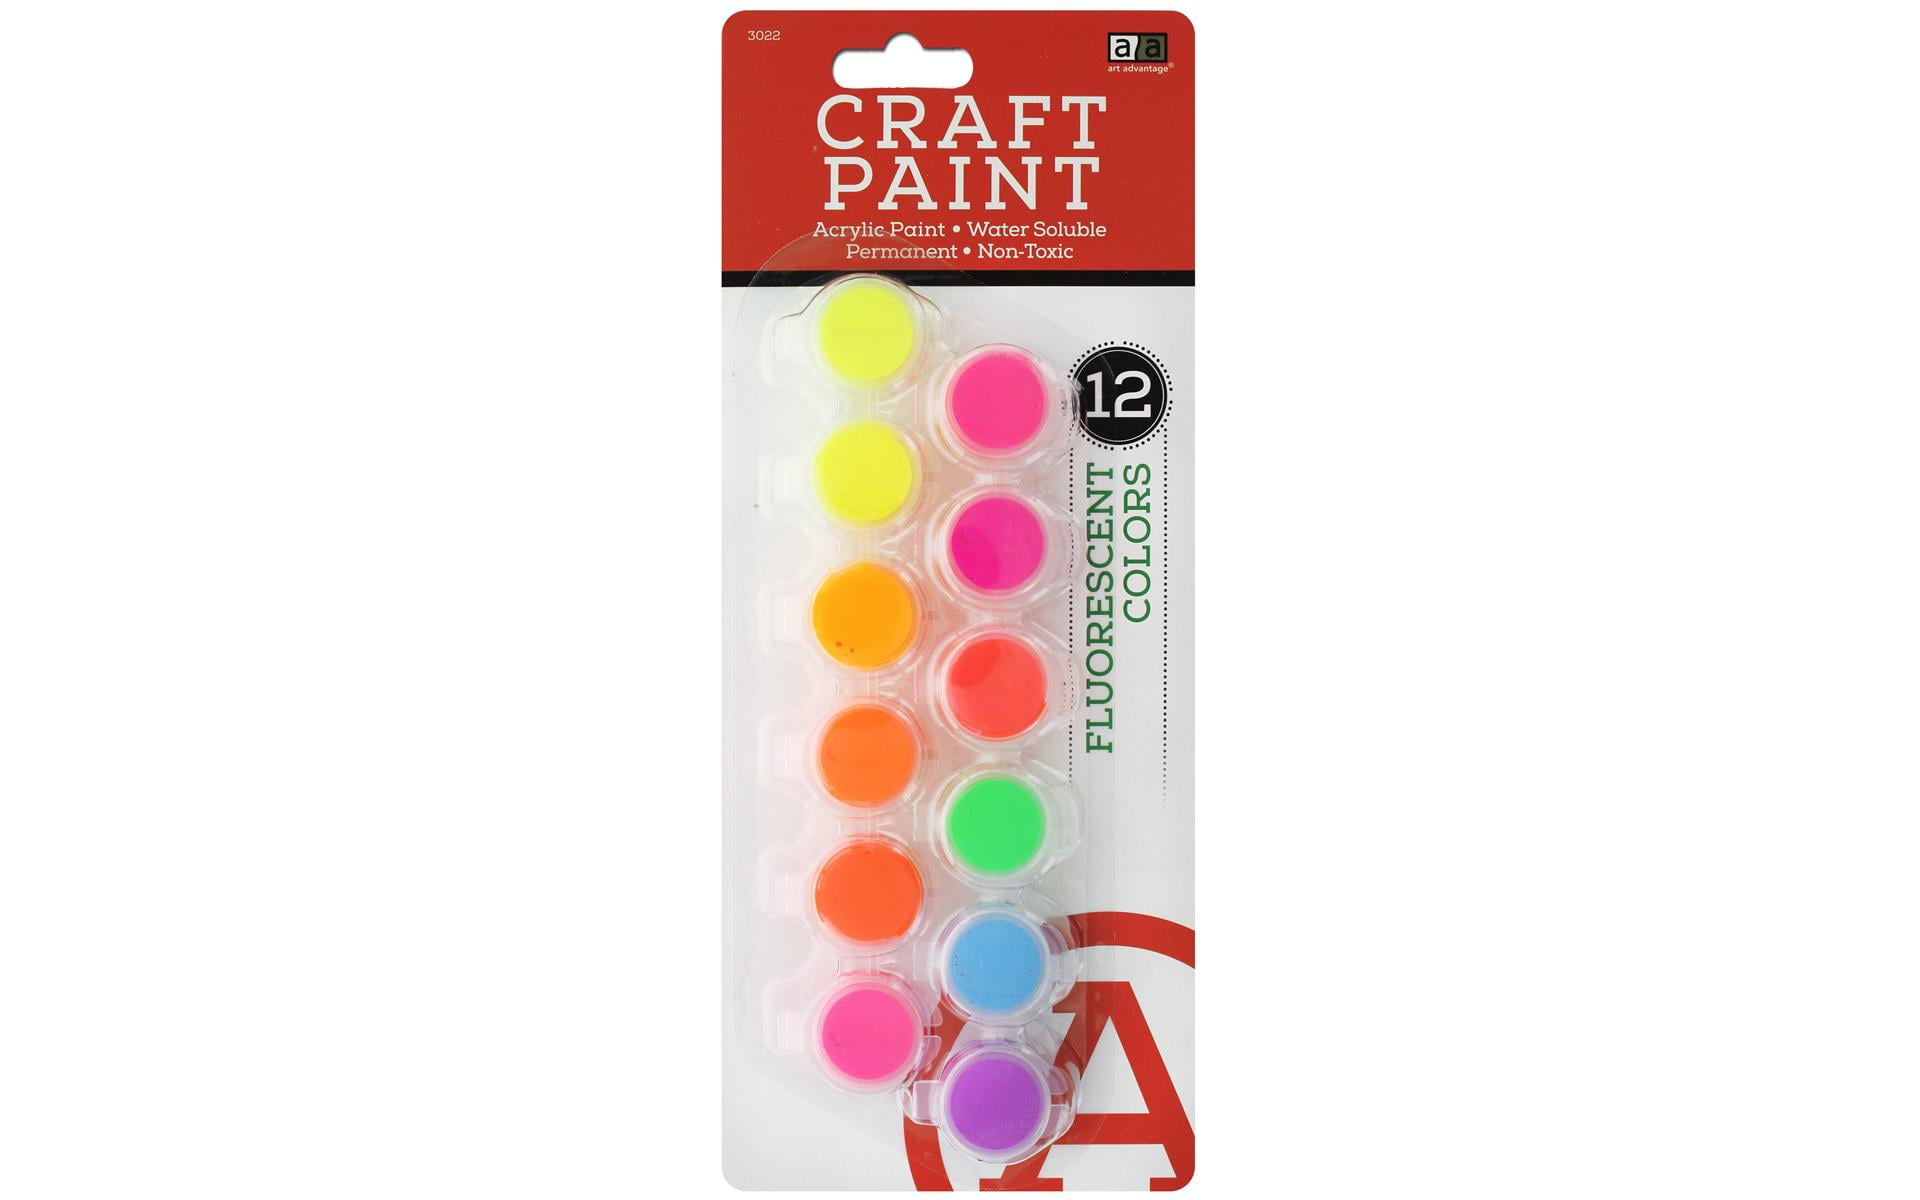 Acrylic Paint Pots for Kids, Classroom, Art and Crafts, 8 Colors (96 Pack)